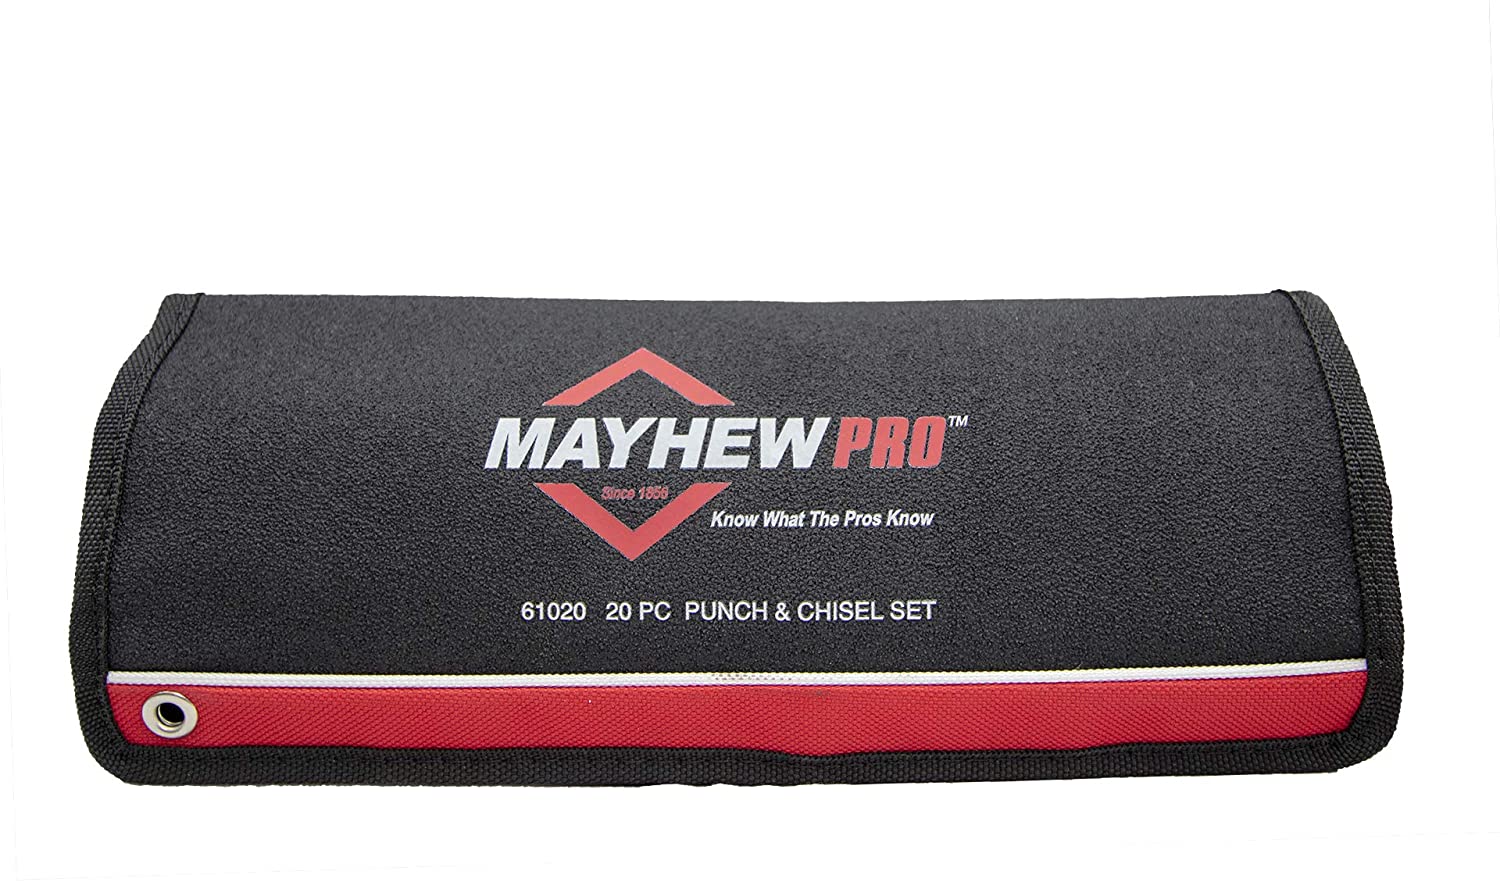 Mayhew Punch and Chisel 20-Piece Set - MPR Tools & Equipment